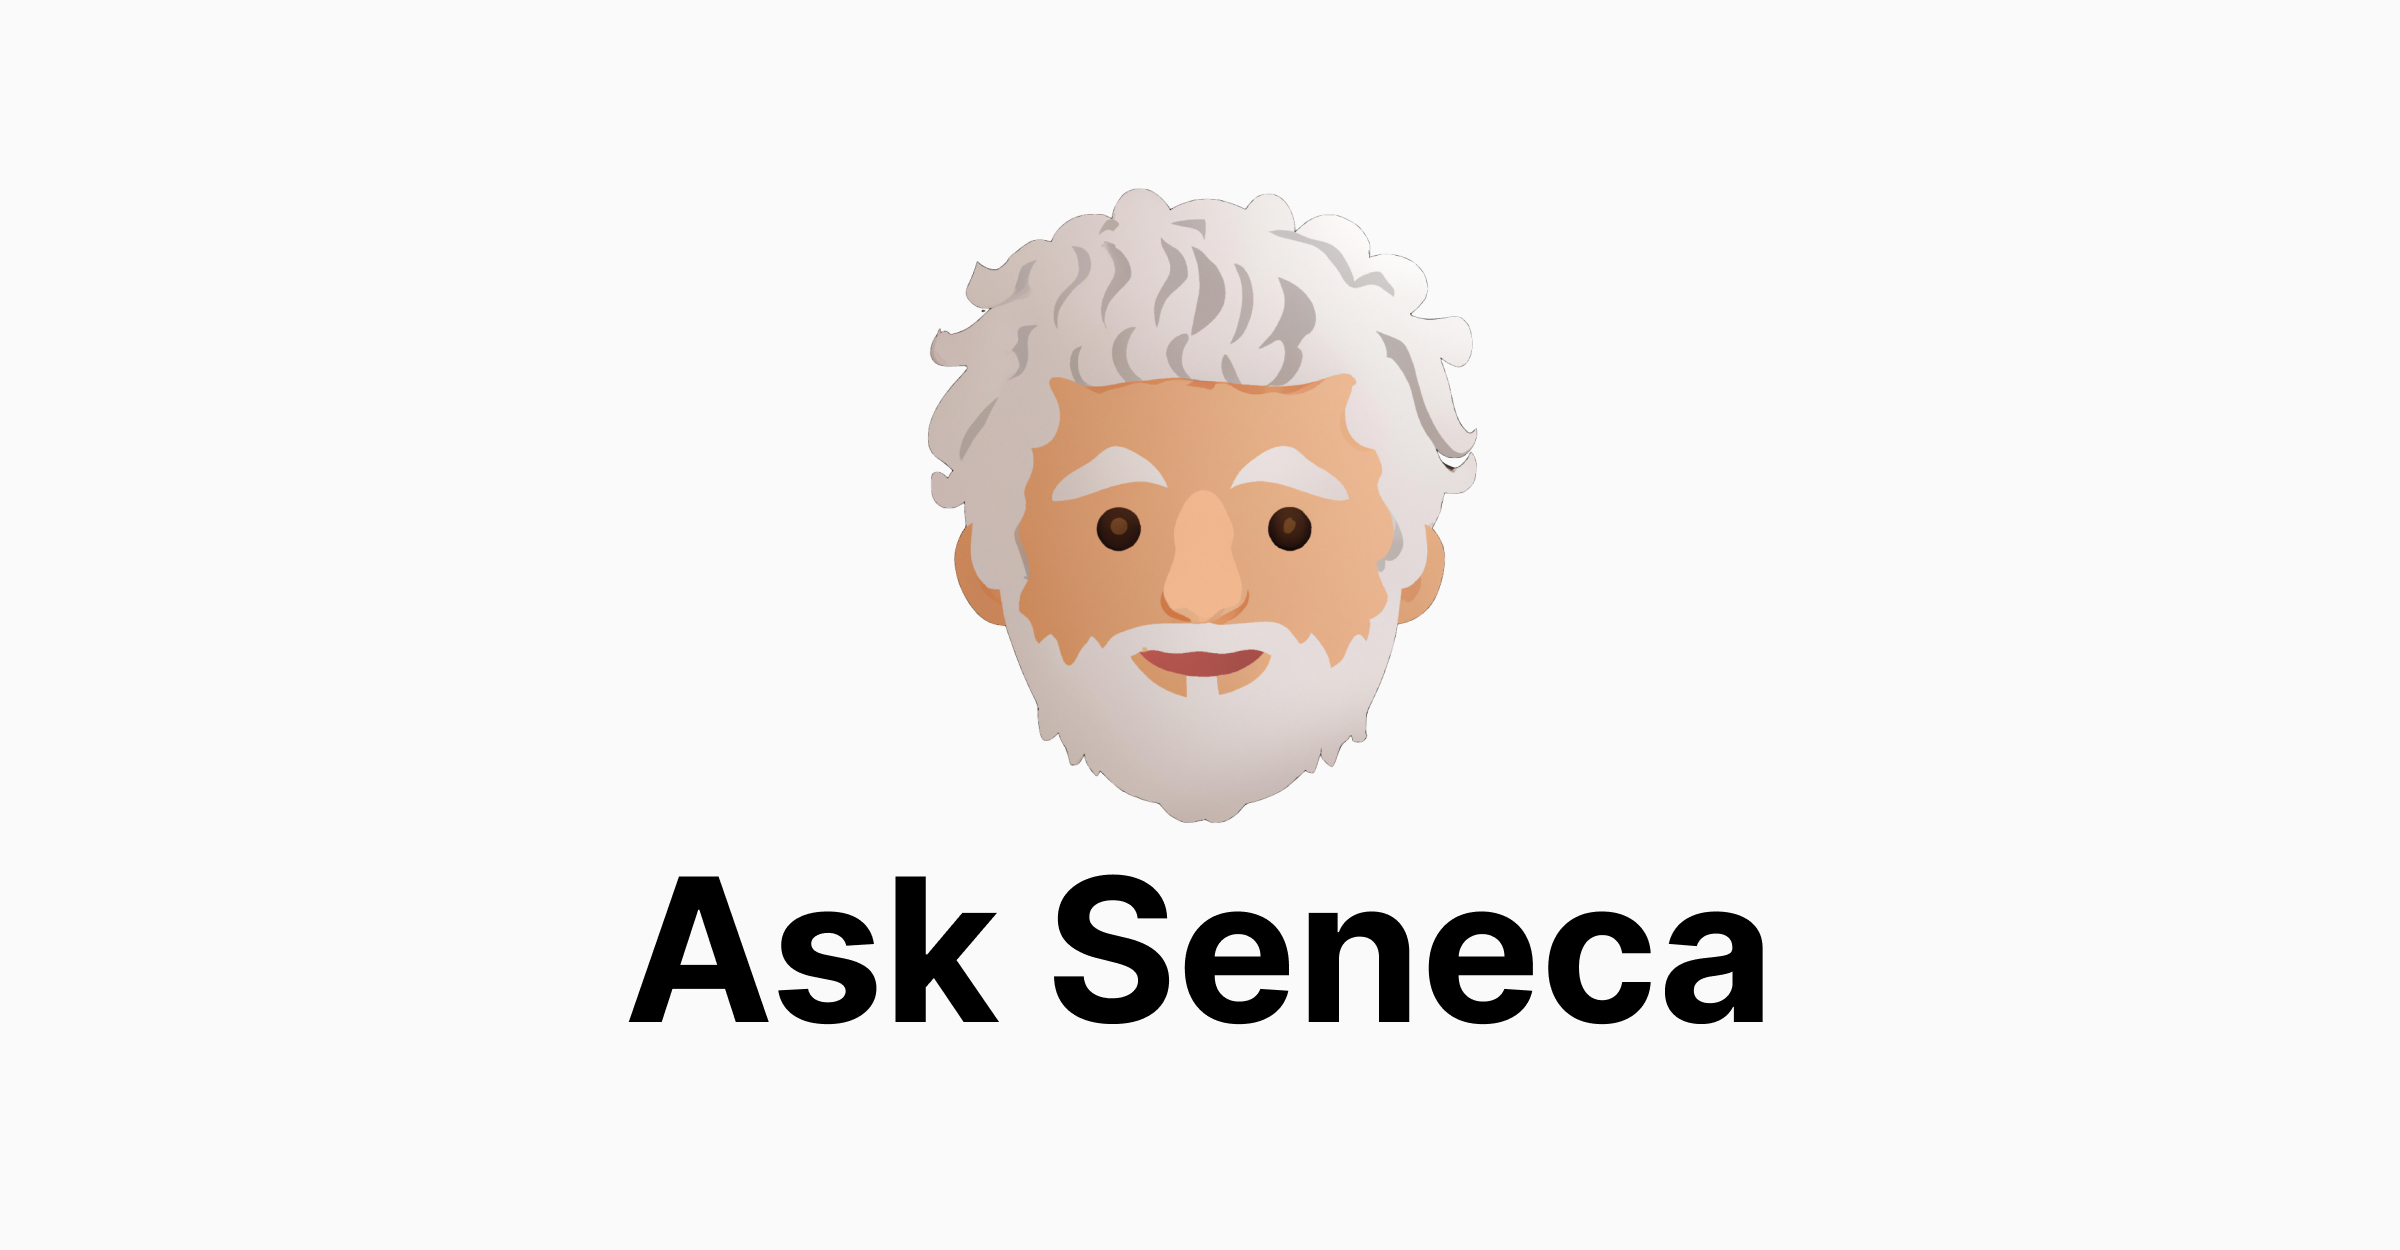 Ask Seneca - A tool to answer questions about Seneca